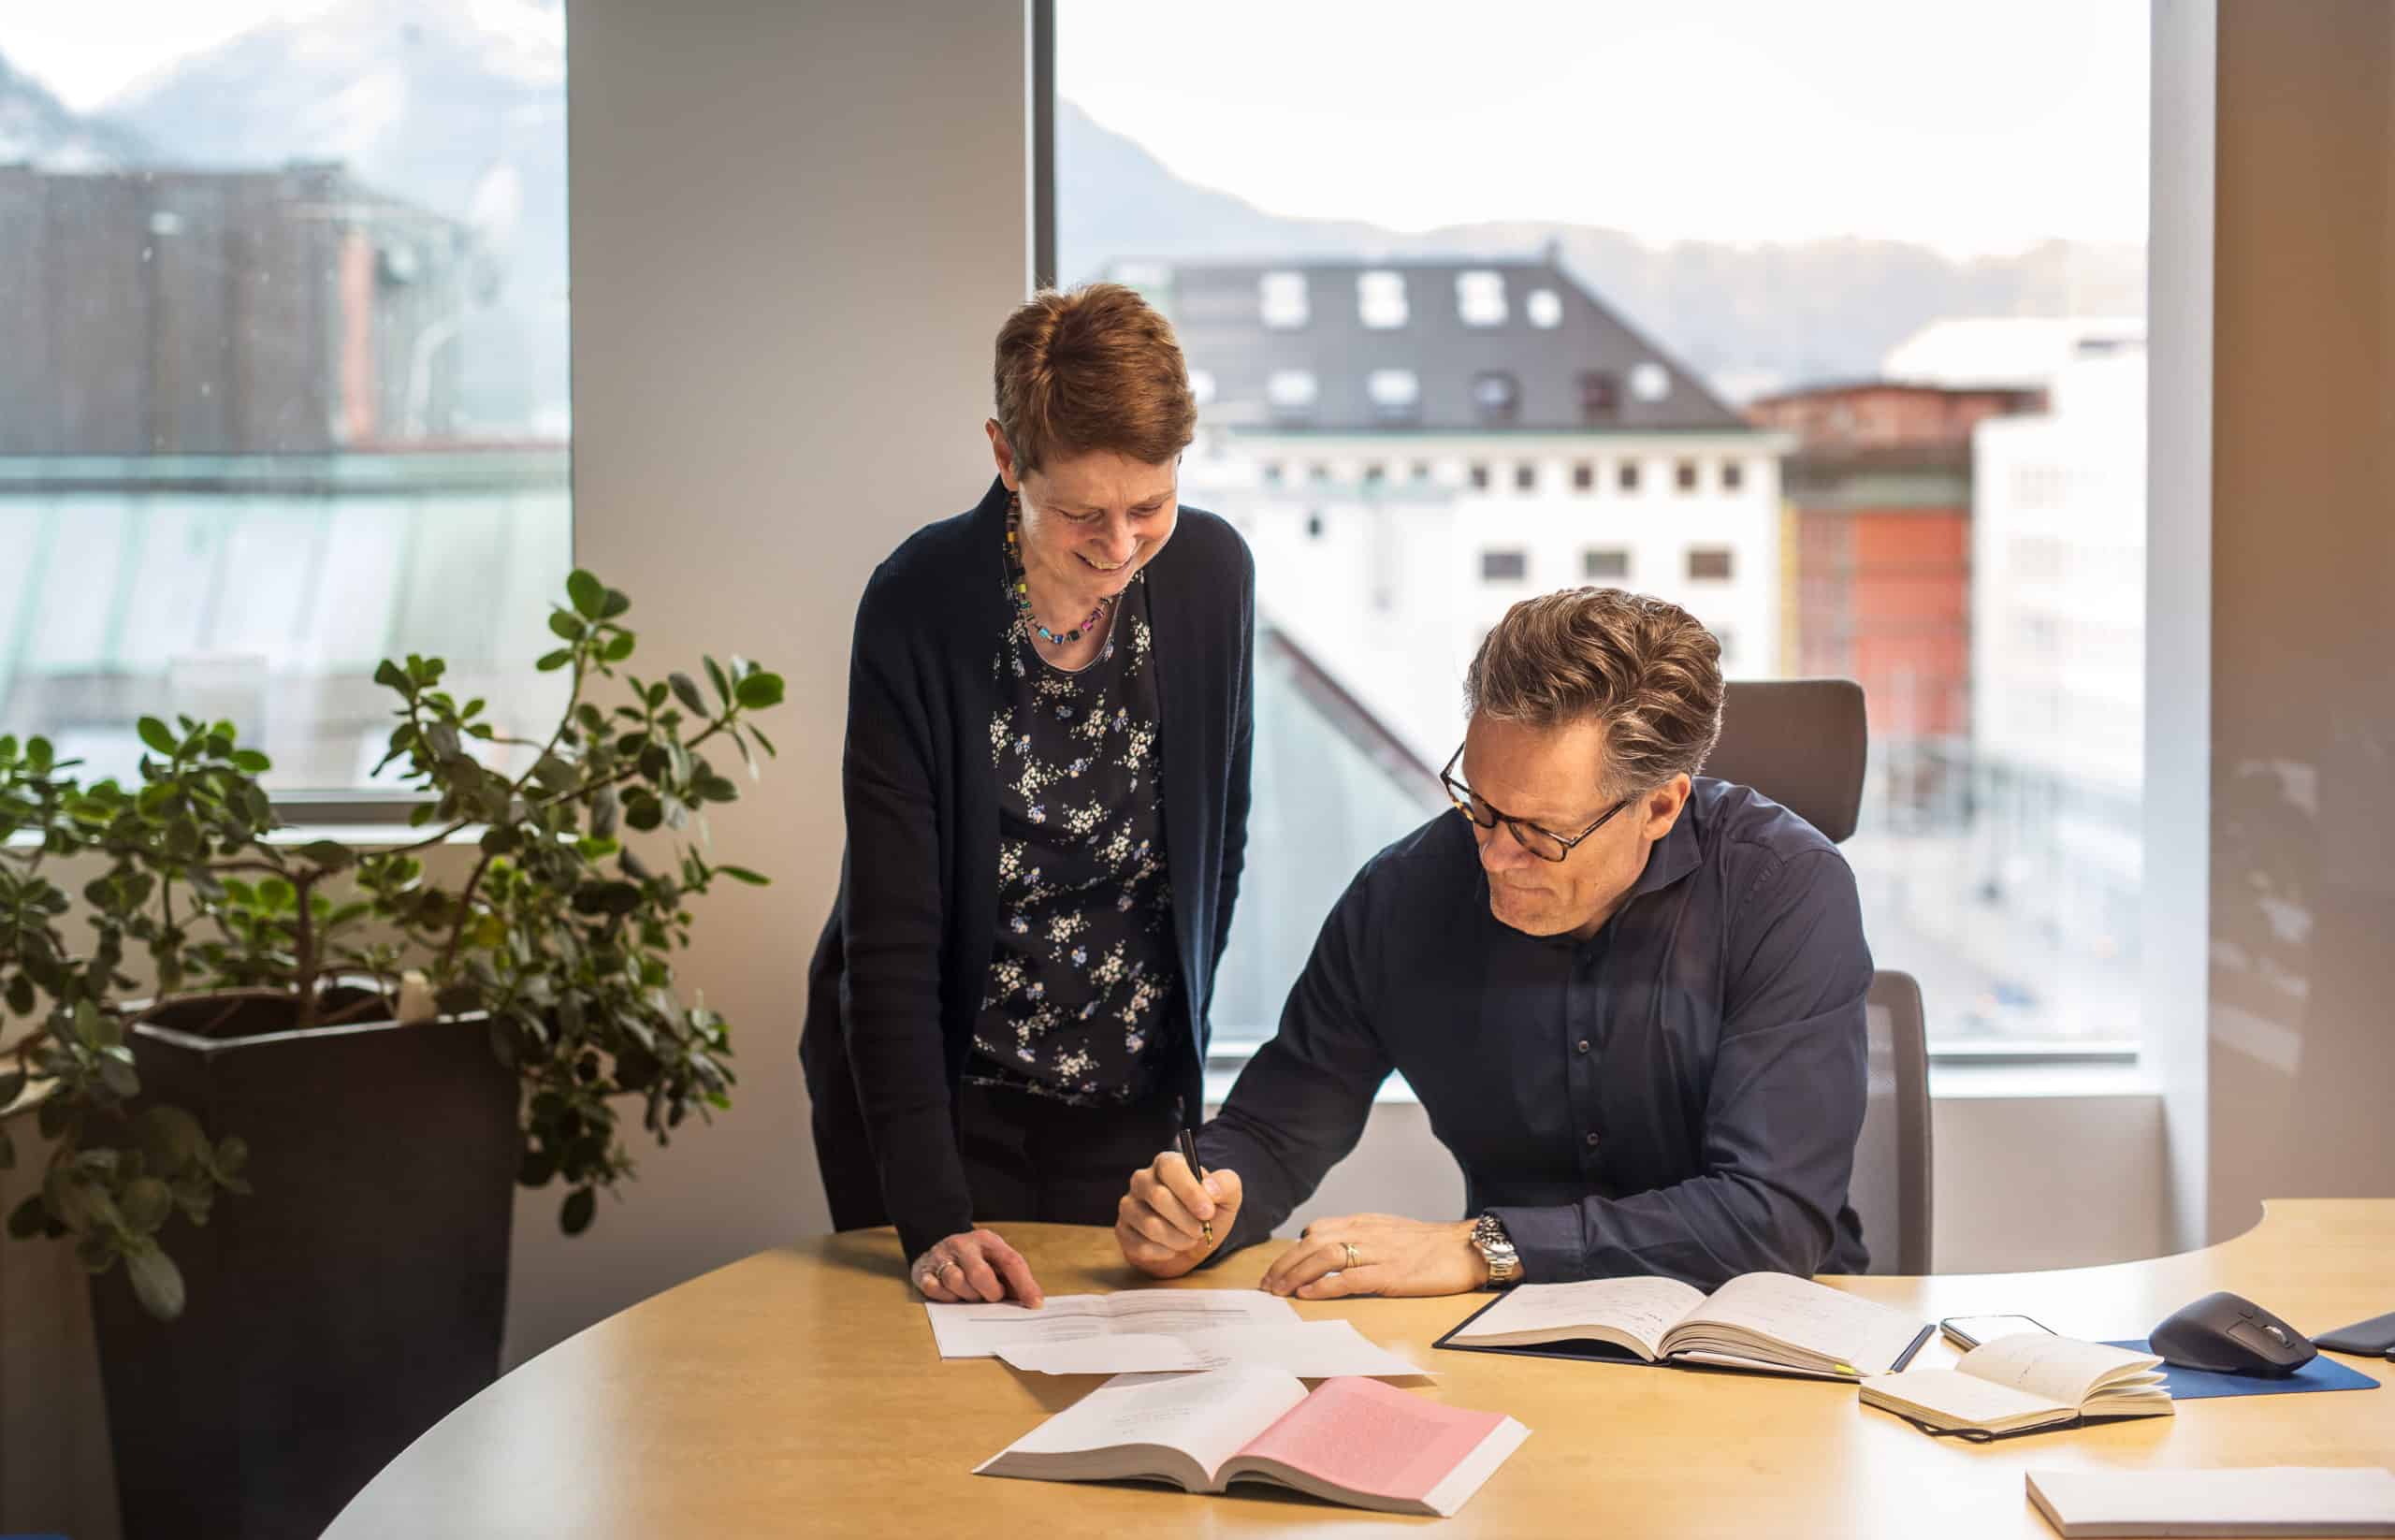 Two employees helps each other at the office: Stig Trygve Andersen and Kolfinna Magnusdottir